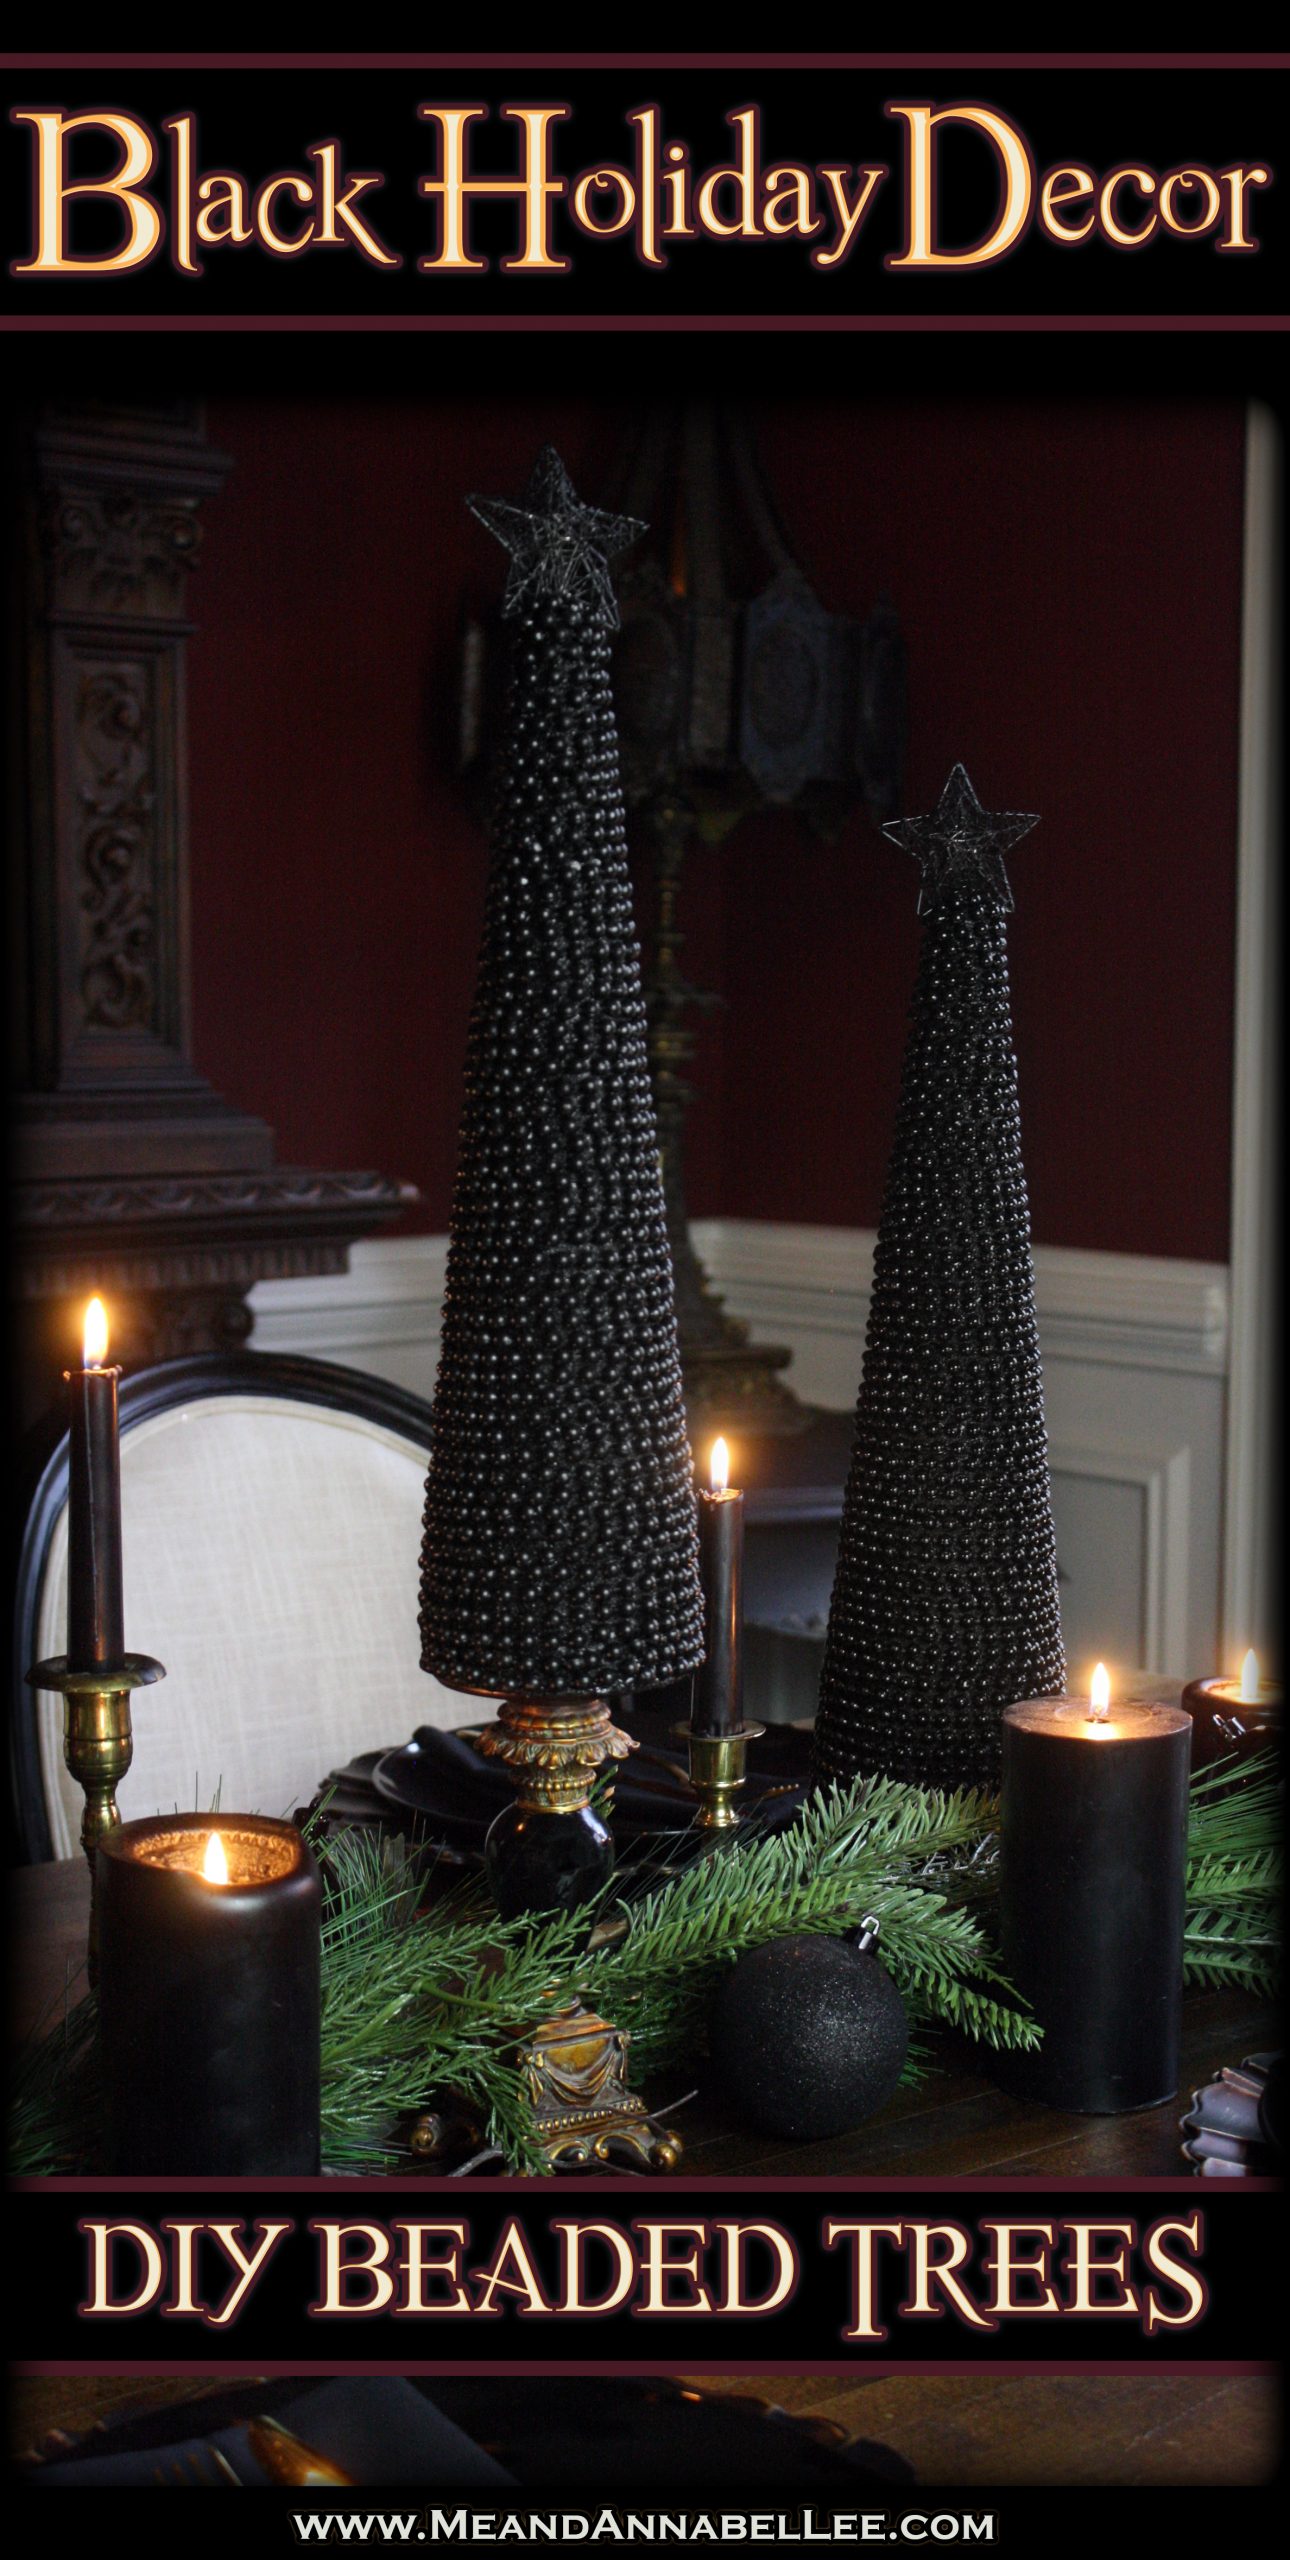 Add a Black Centerpiece to your Christmas Table Setting with these DIY Black Beaded Holiday Trees | Me and Annabel Lee Blog #GothicChristmas #BlackChristmasDecor #Christmasdecor #Christmastablesetting #holidayentertaining